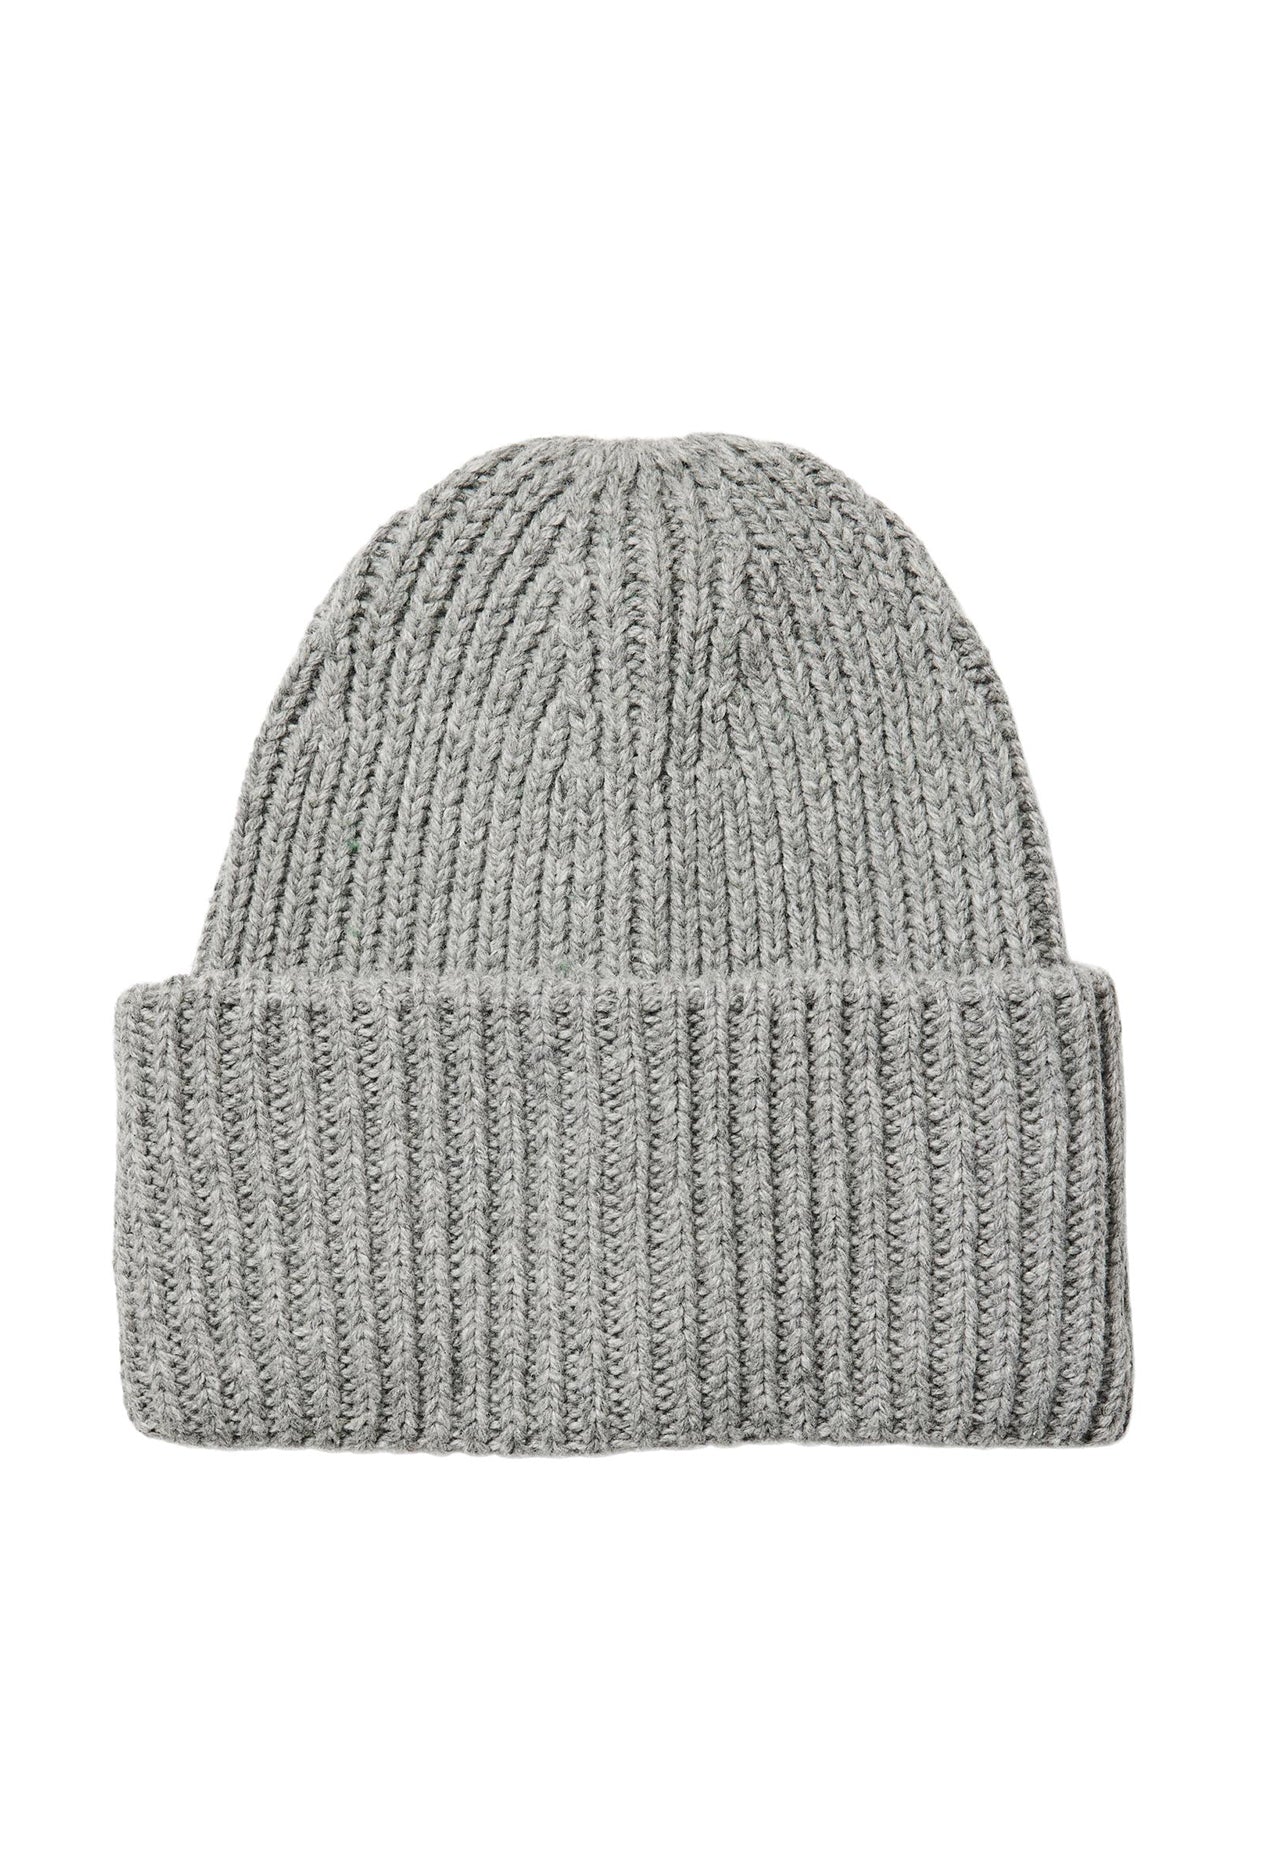 PIECES Juca Fisherman Rib Knit Beanie Hat in Grey Melange - One Nation Clothing